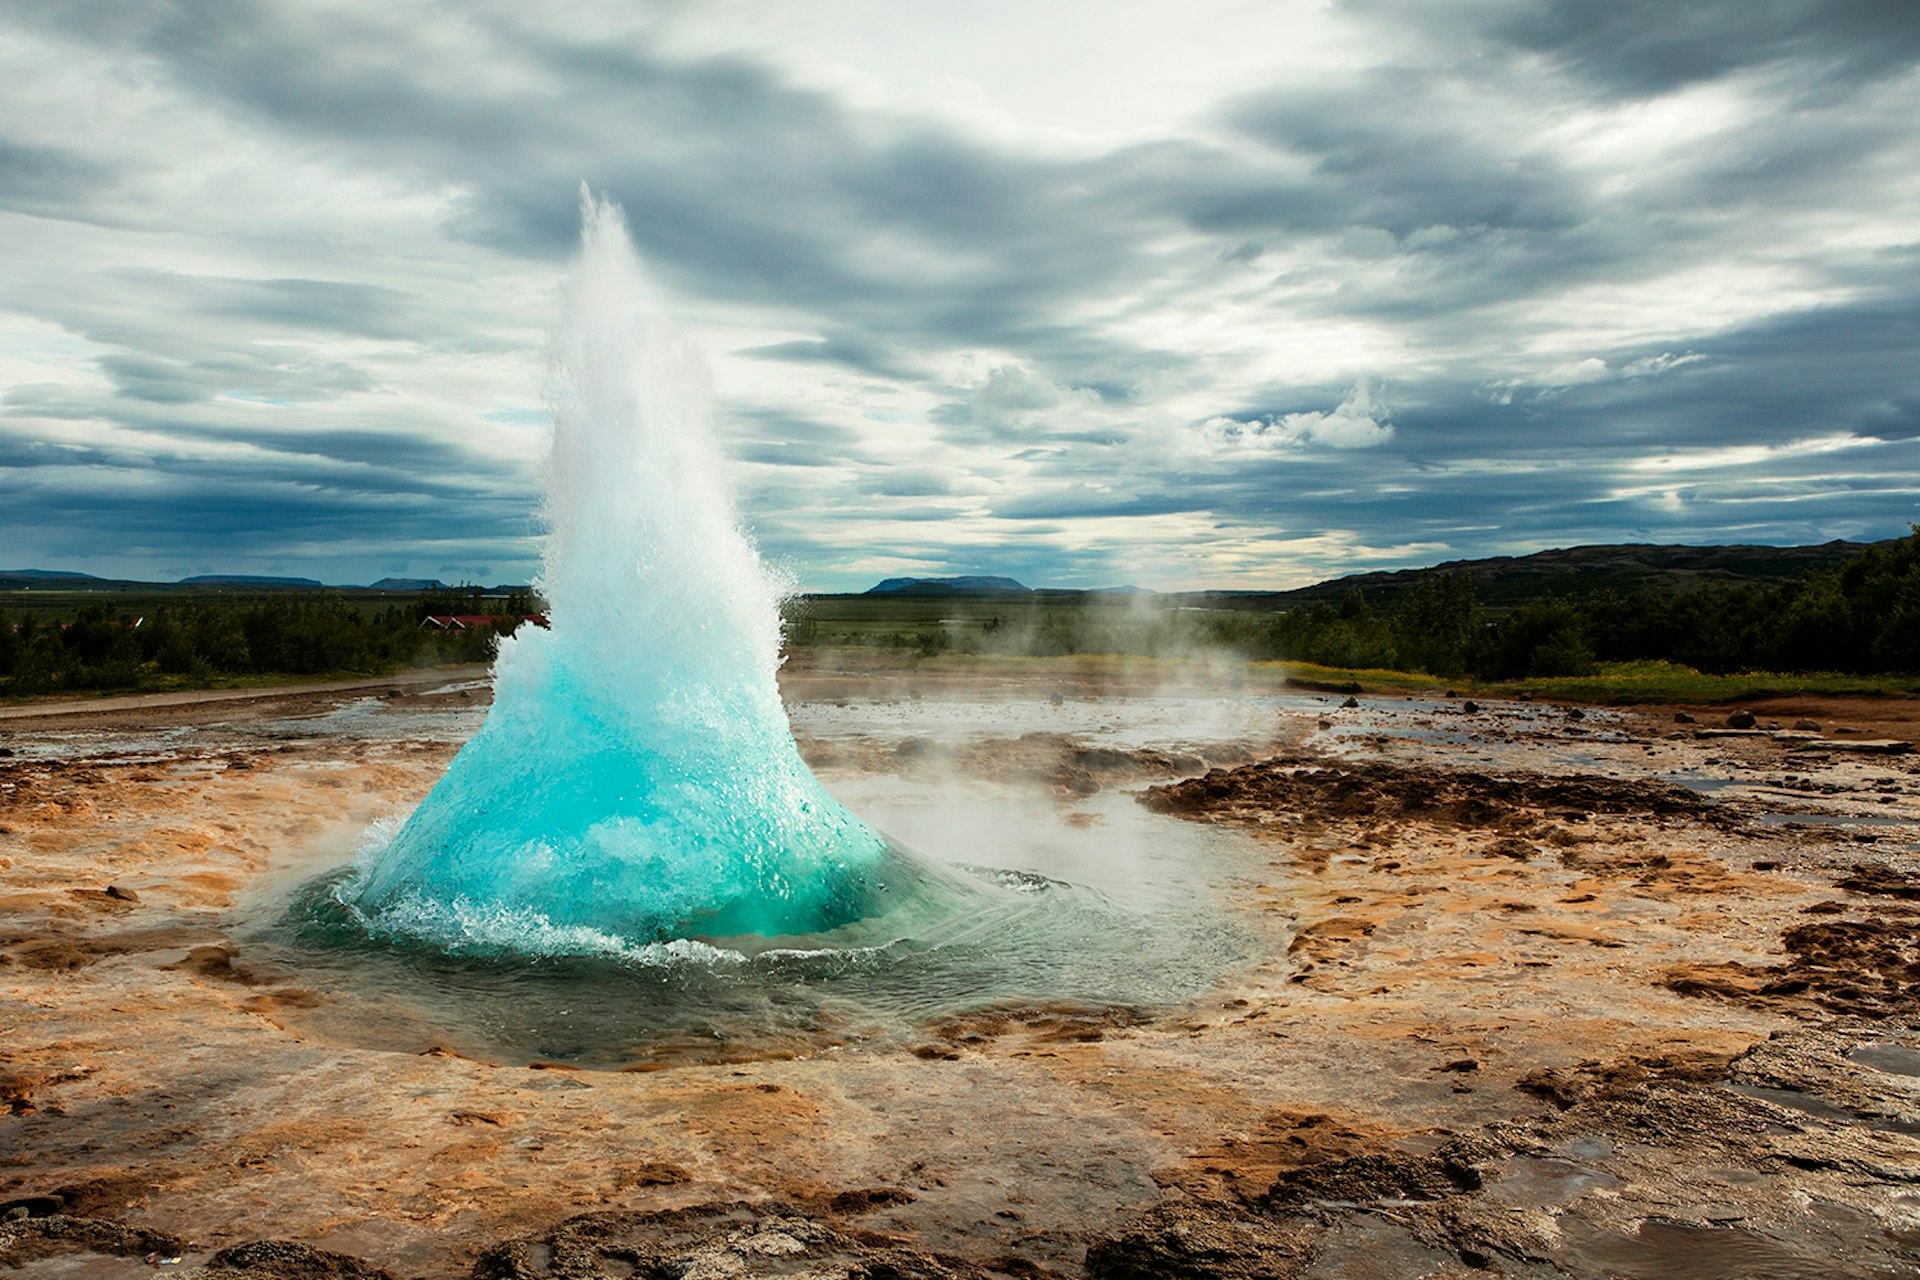 Iceland's Strokkur geyser © Roc Canals Photography / Getty Images